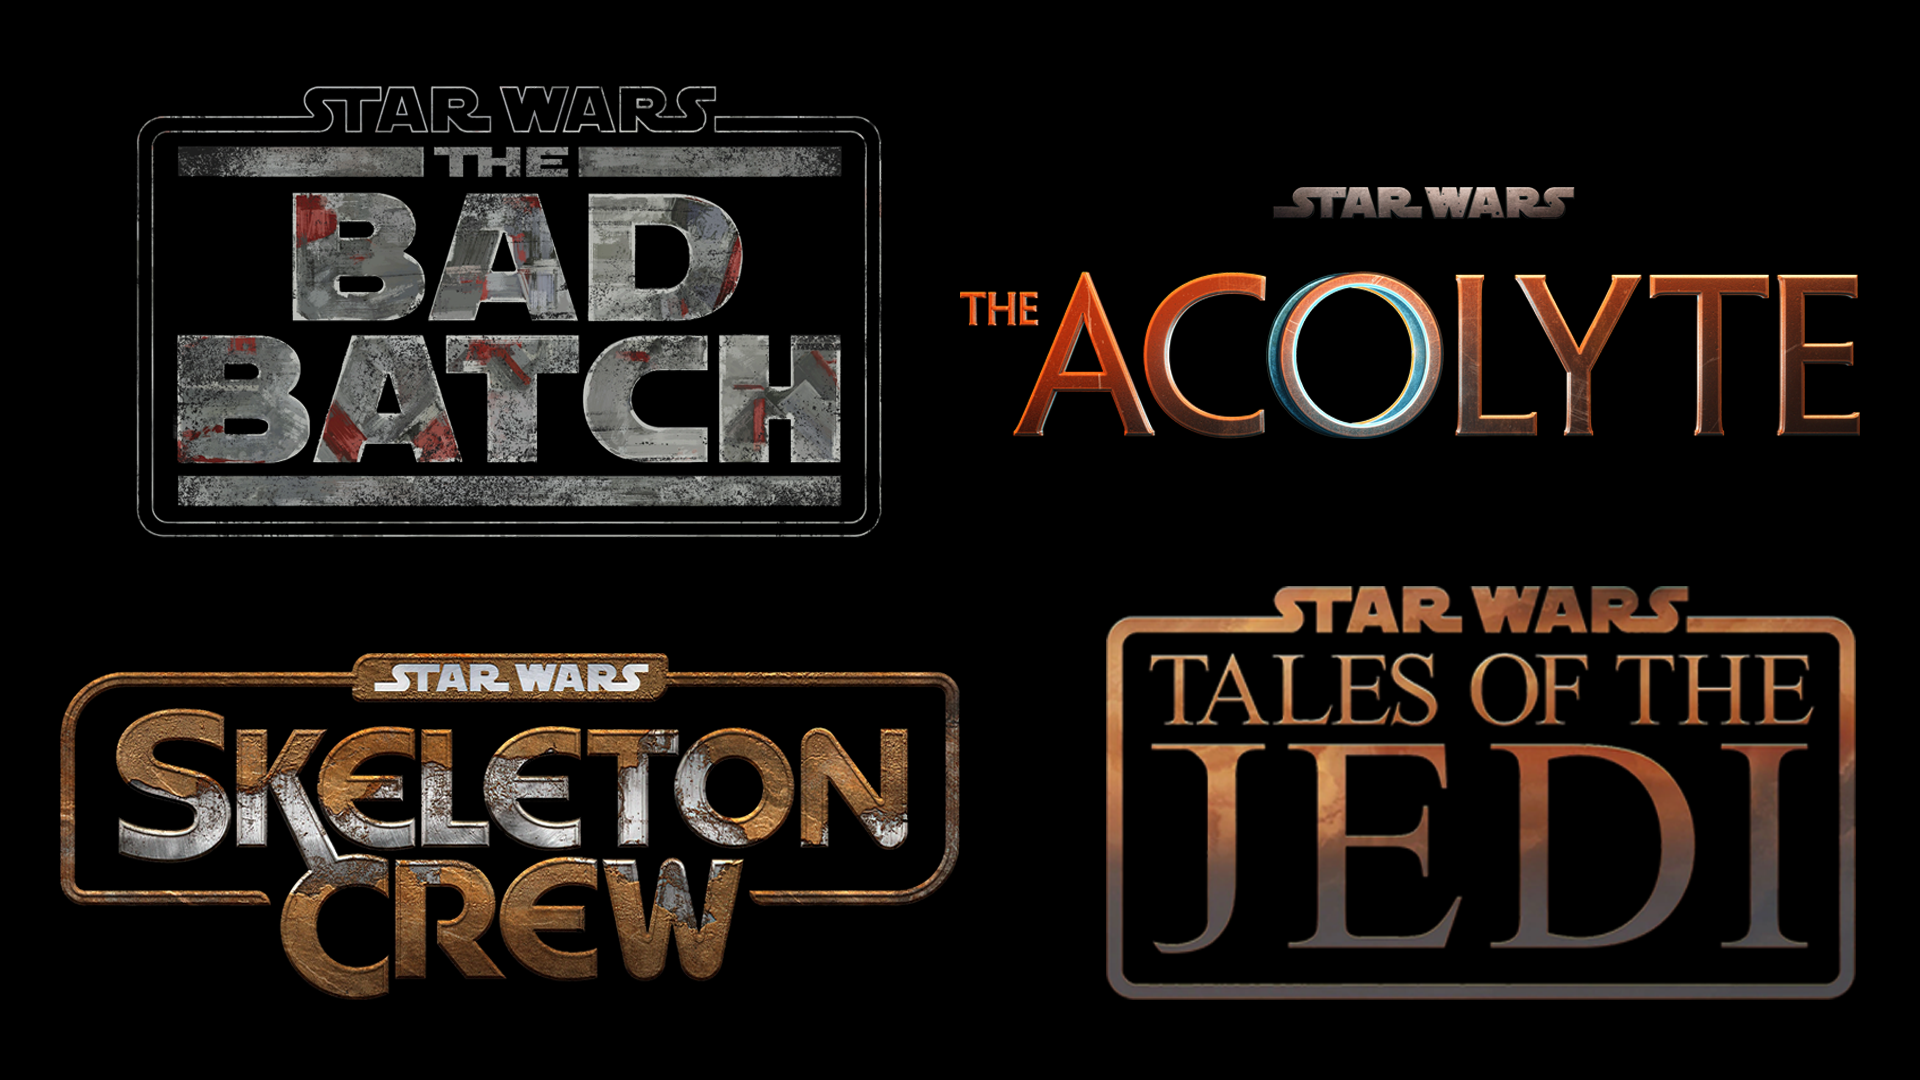 Andor' Star Wars Series: “What You Know Is Really All Wrong